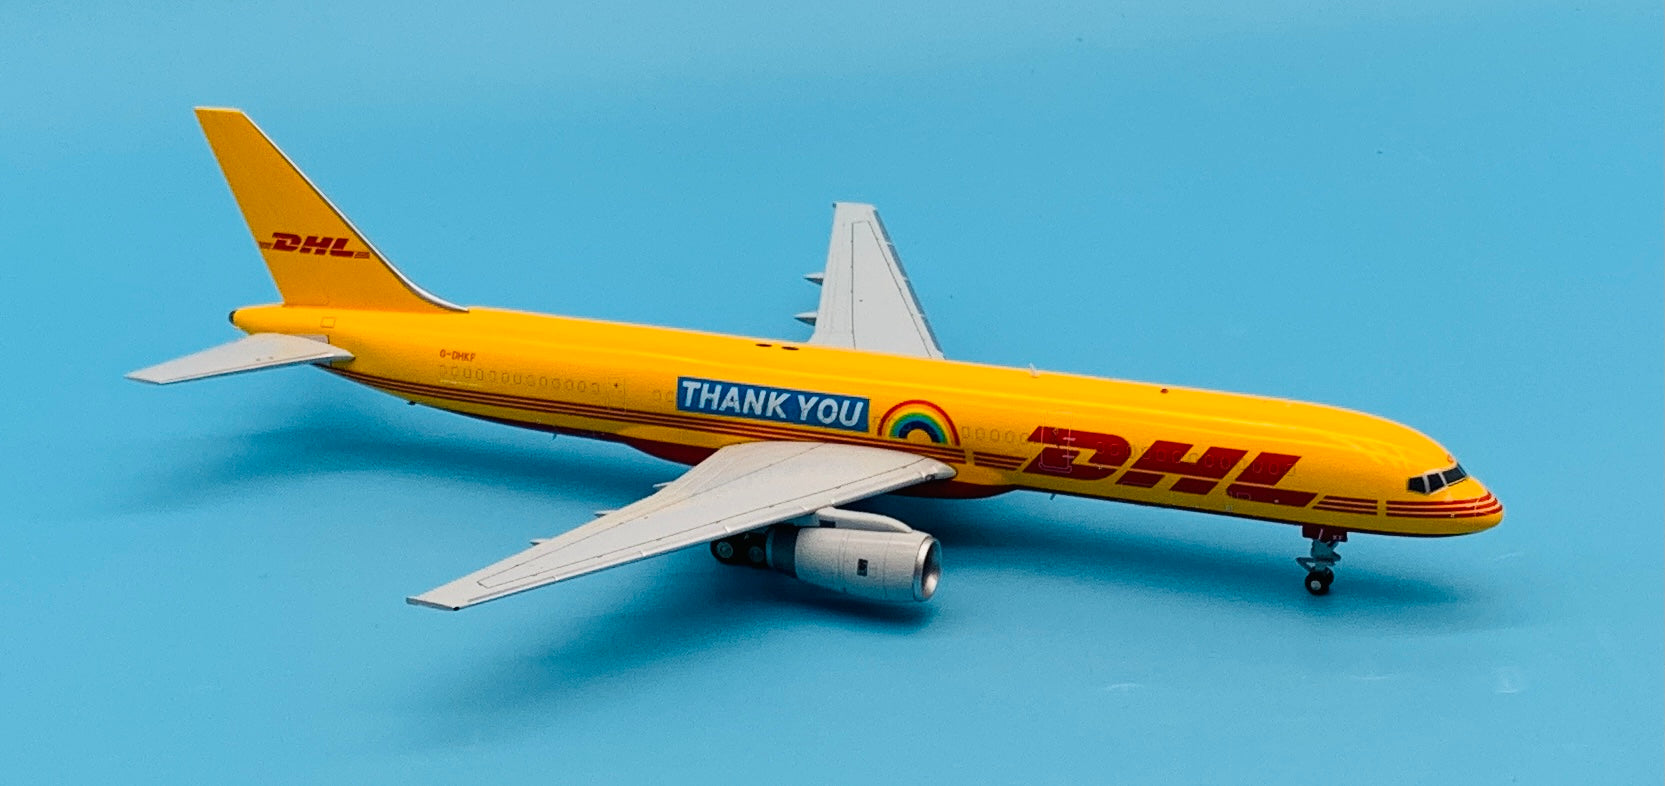 JC Wings 1/200 DHL Air Boeing 757-200(PCF) THANK YOU Livery G-DHKF